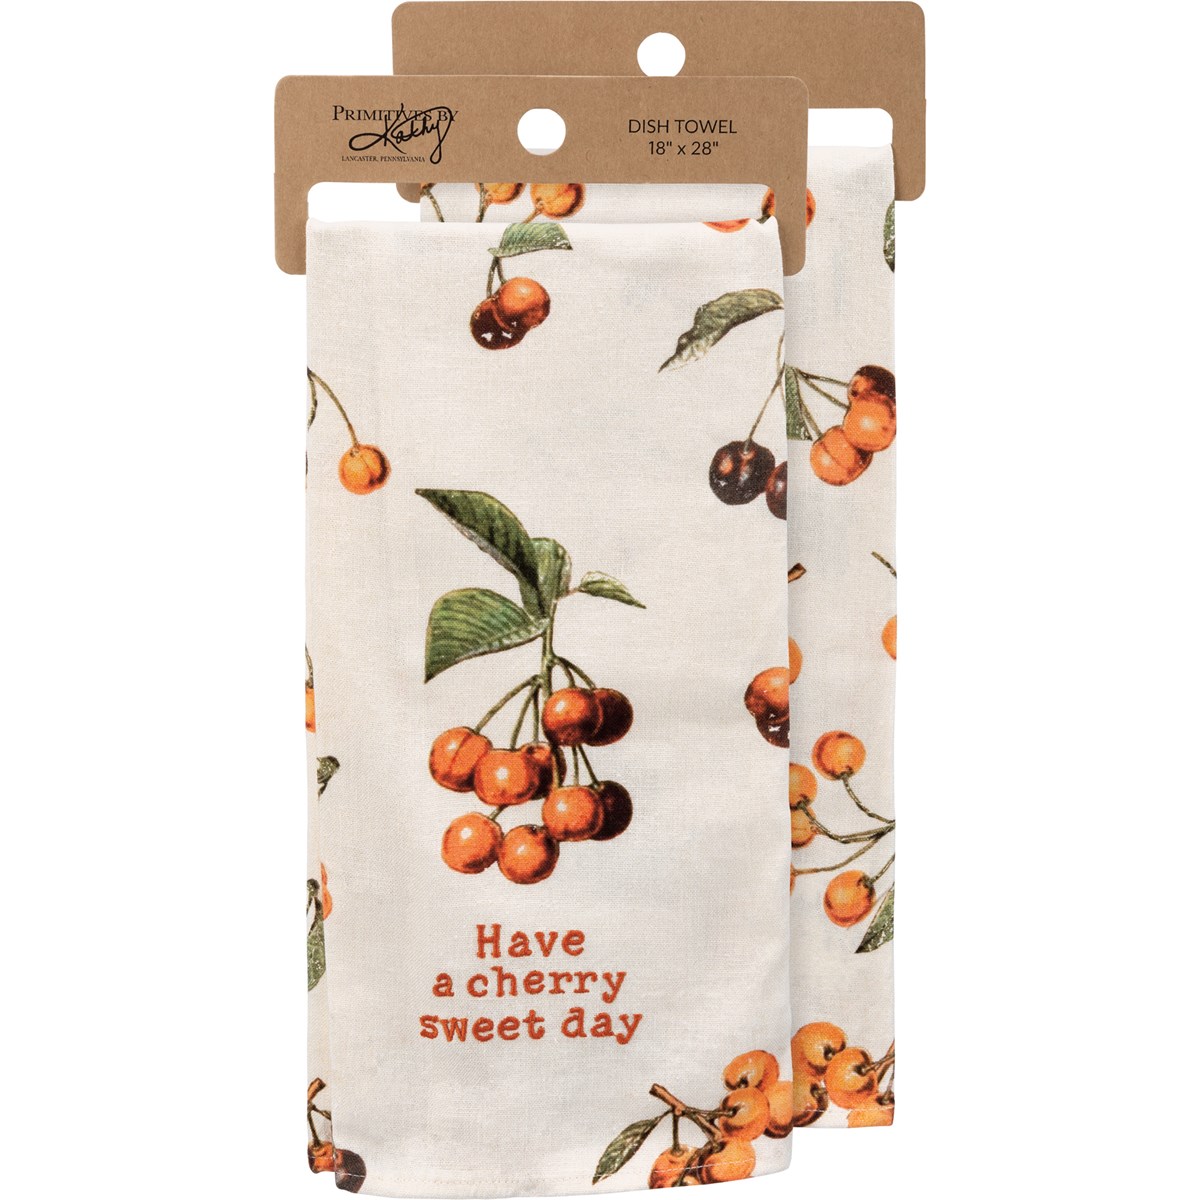 Have A Cherry Sweet Day Kitchen Towel - Cotton, Linen